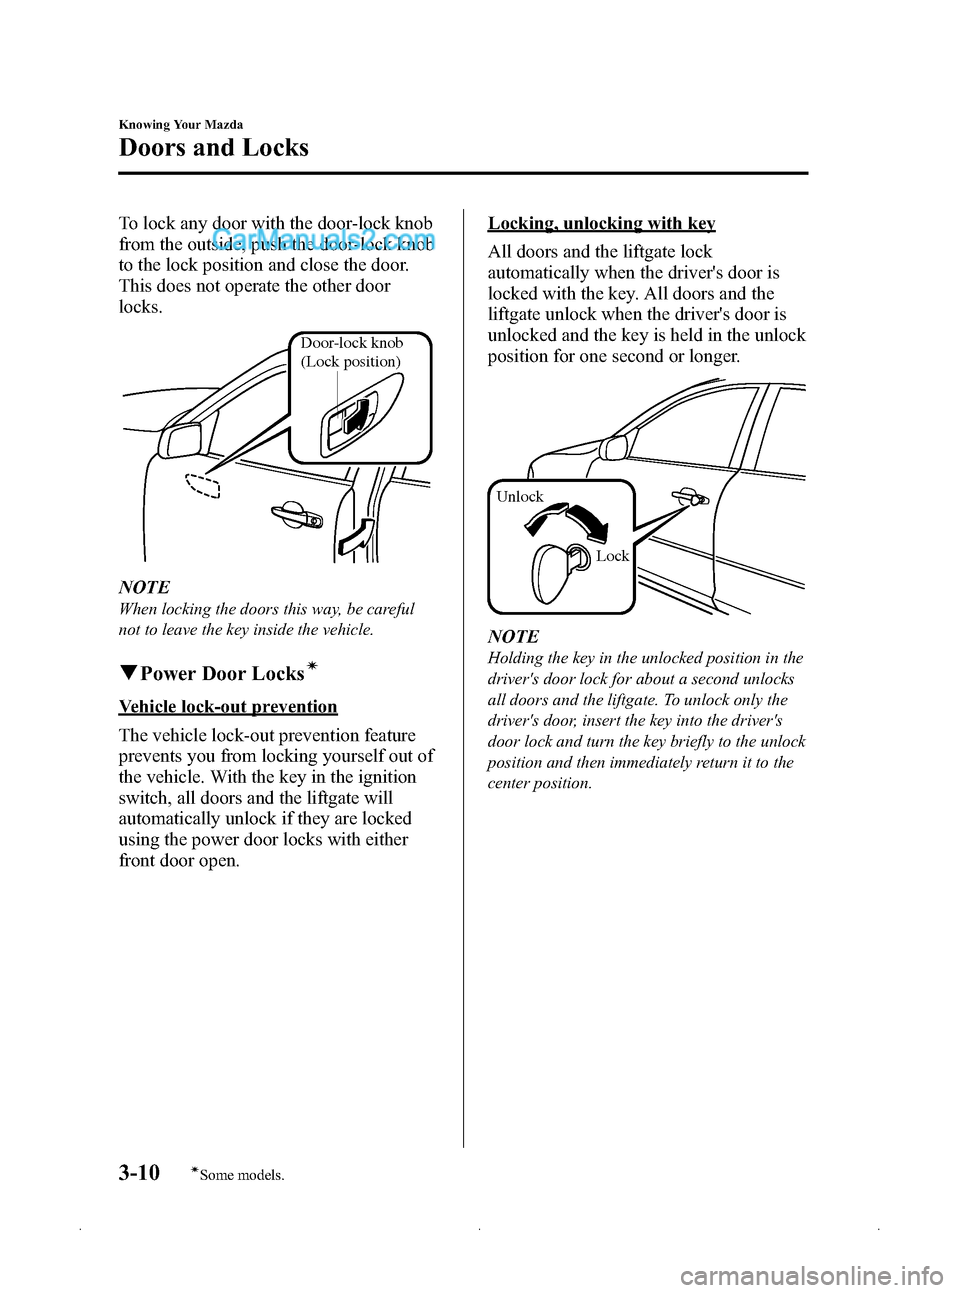 MAZDA MODEL MAZDASPEED 3 2009  Owners Manual (in English) Black plate (84,1)
To lock any door with the door-lock knob
from the outside, push the door-lock knob
to the lock position and close the door.
This does not operate the other door
locks.
Door-lock kno